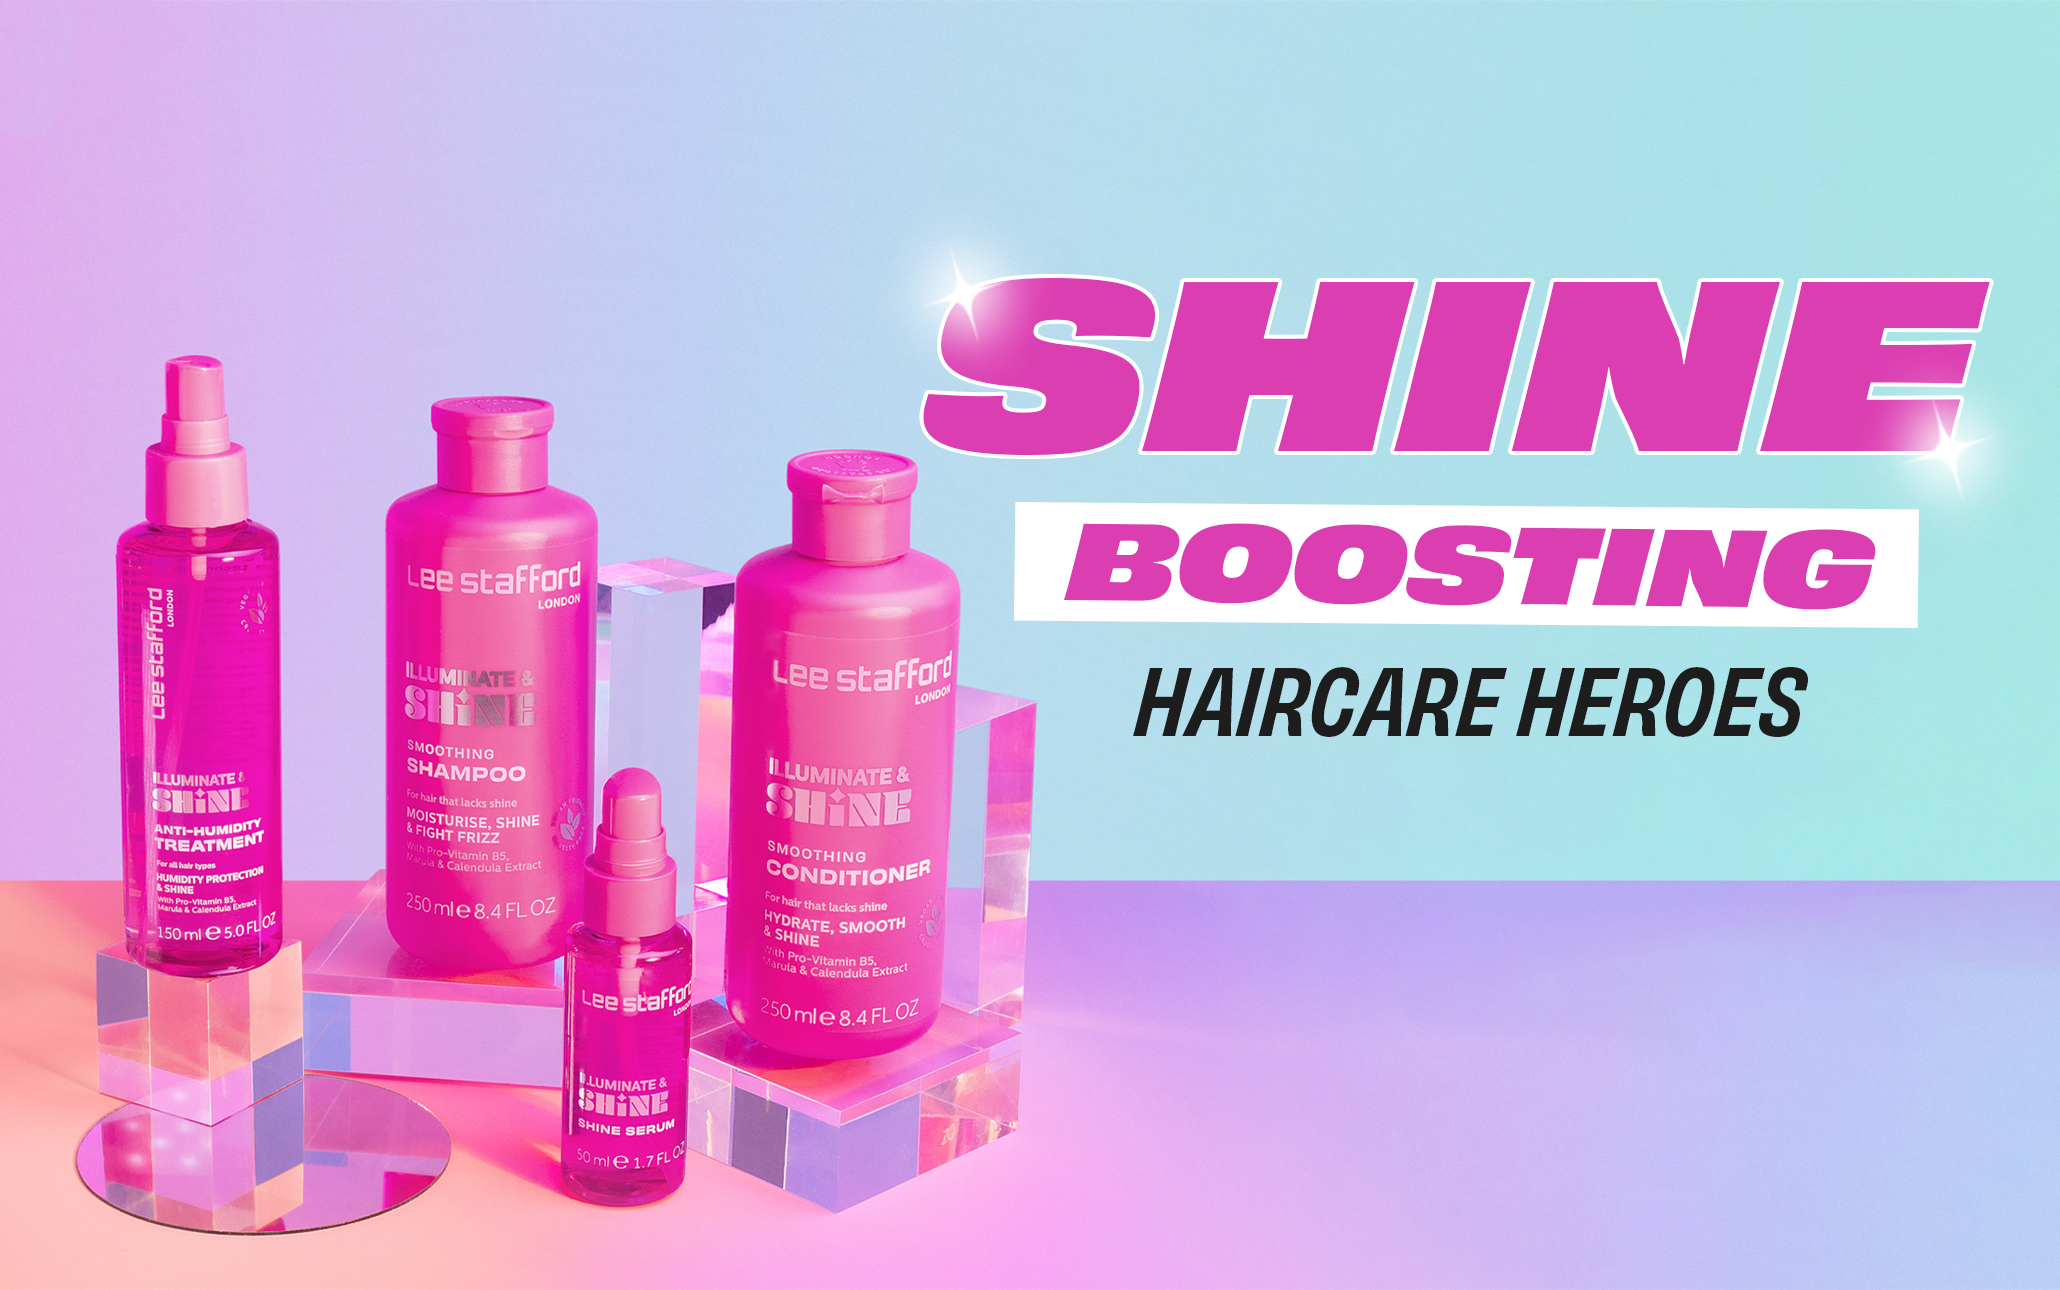 NEW IN: Frizz-taming hair heroes for glass hair